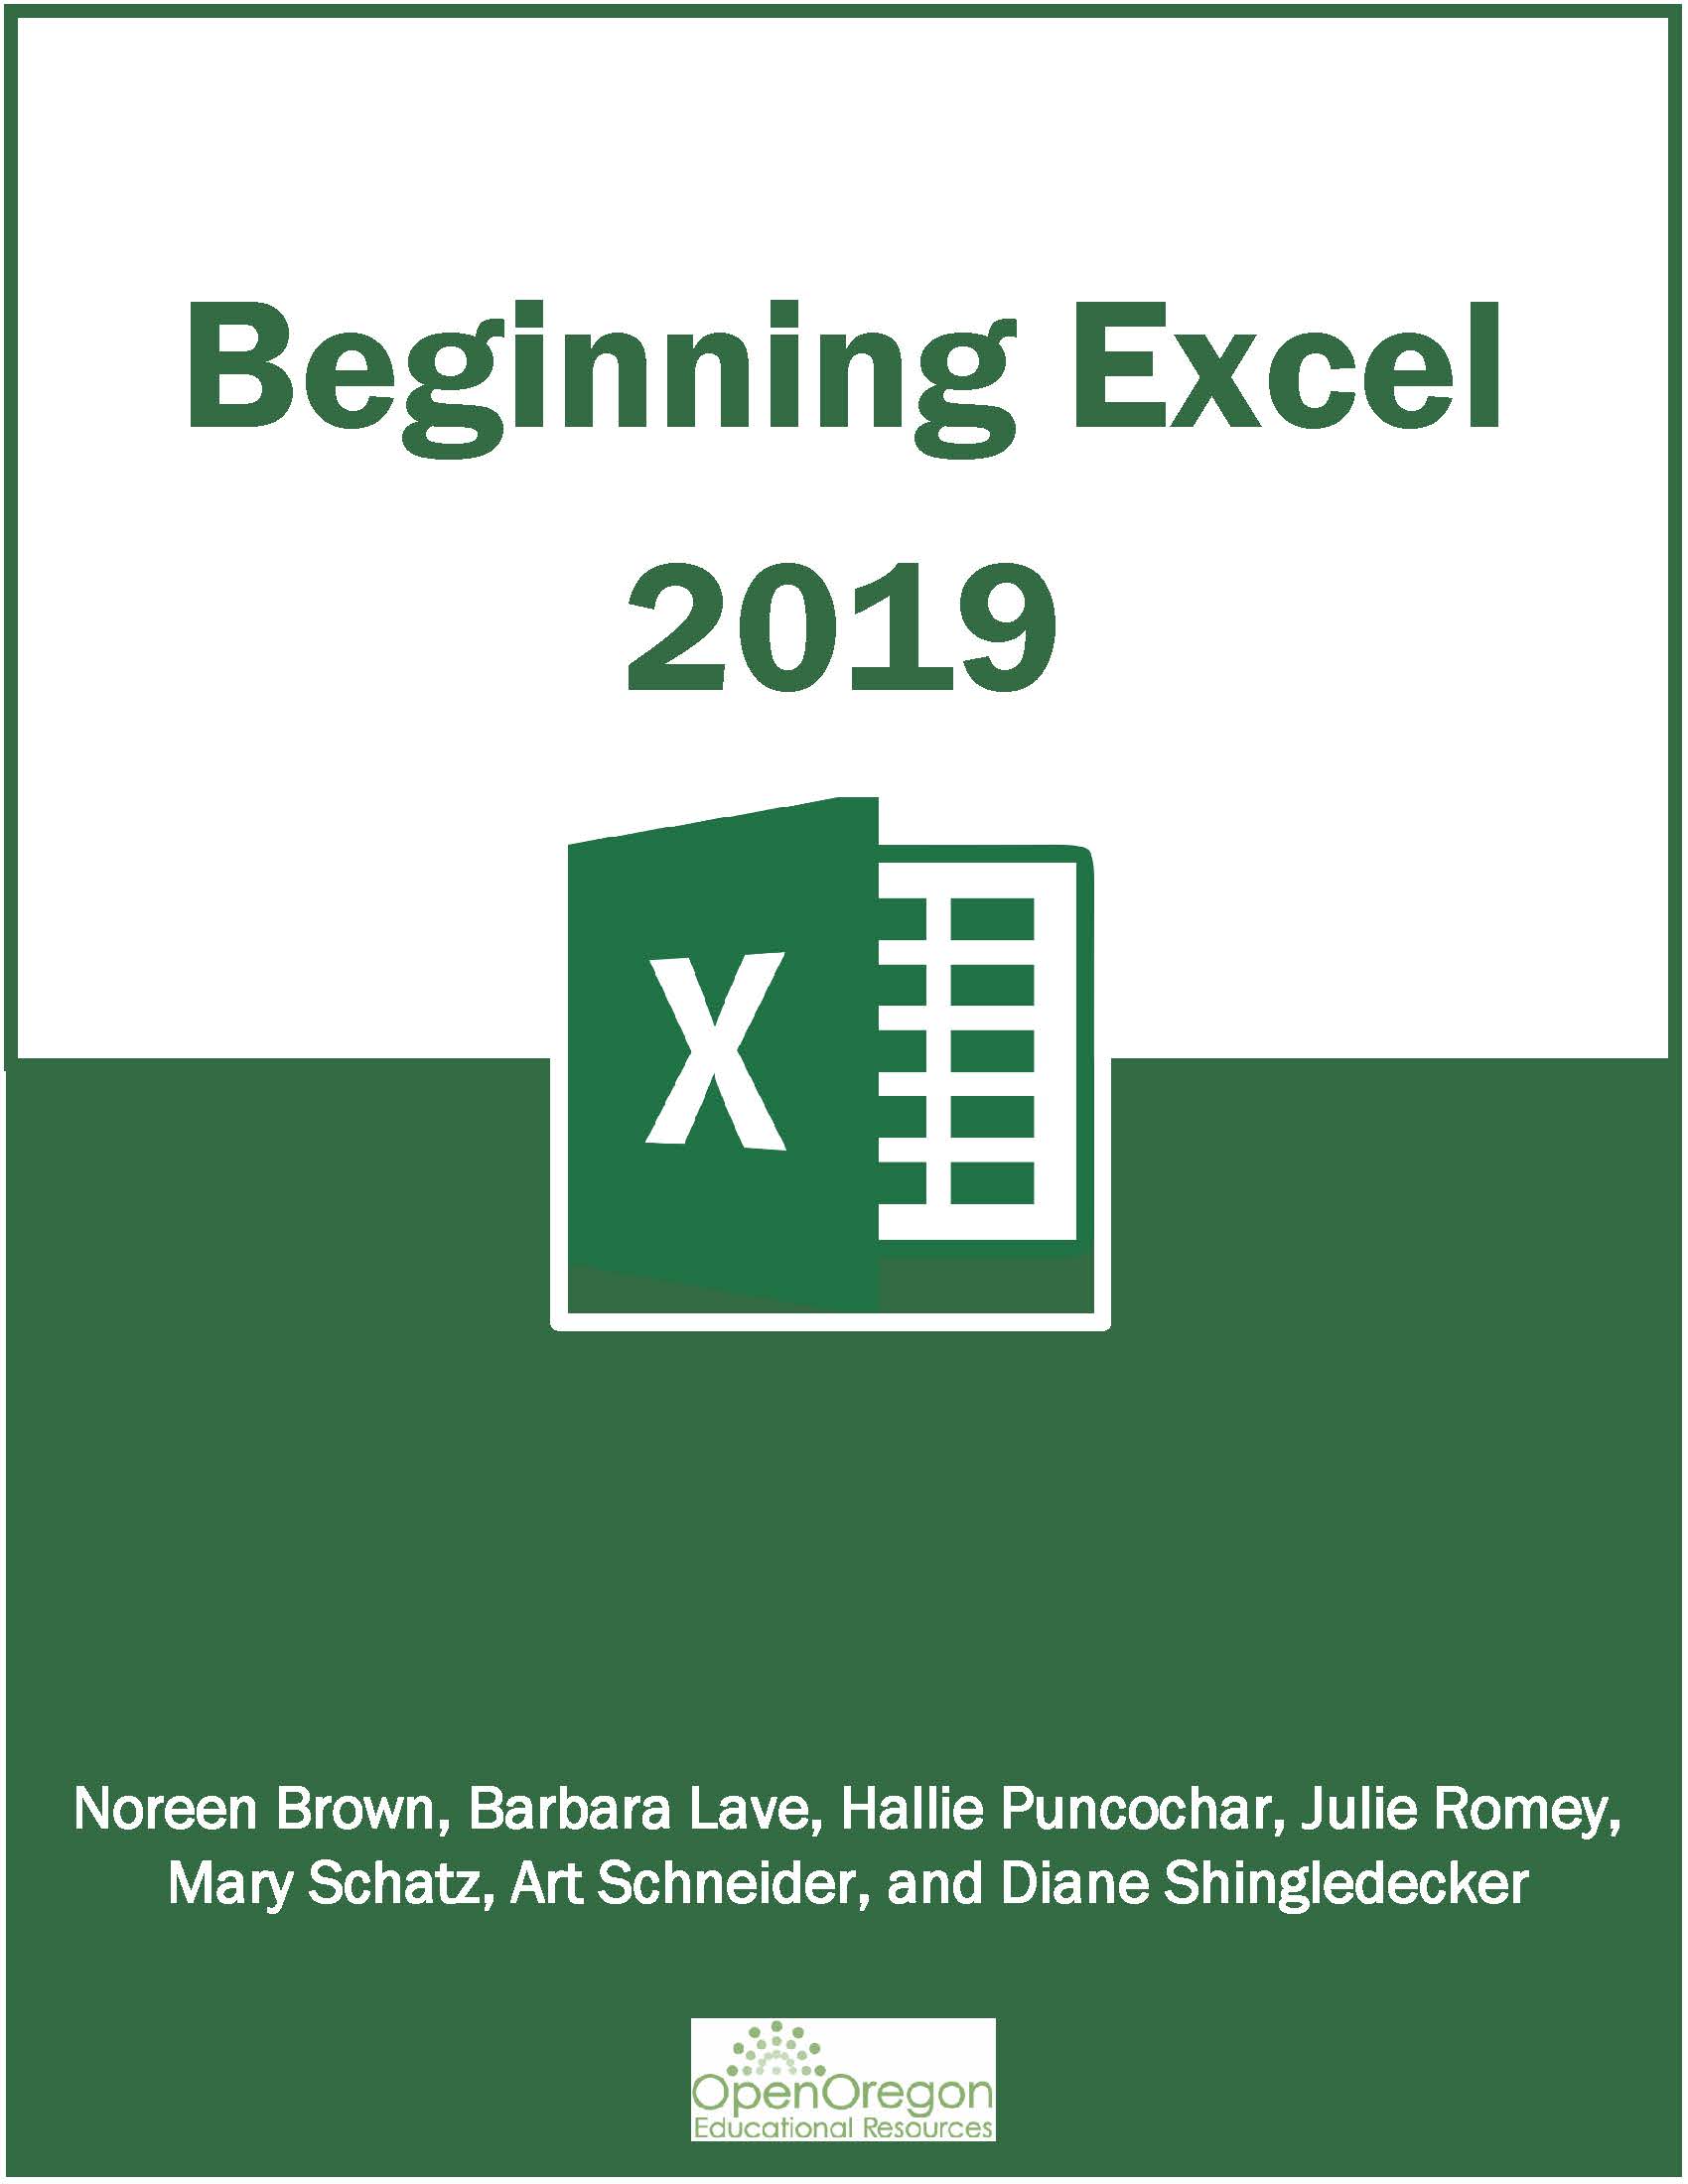 Beginning Excel 2019 book cover